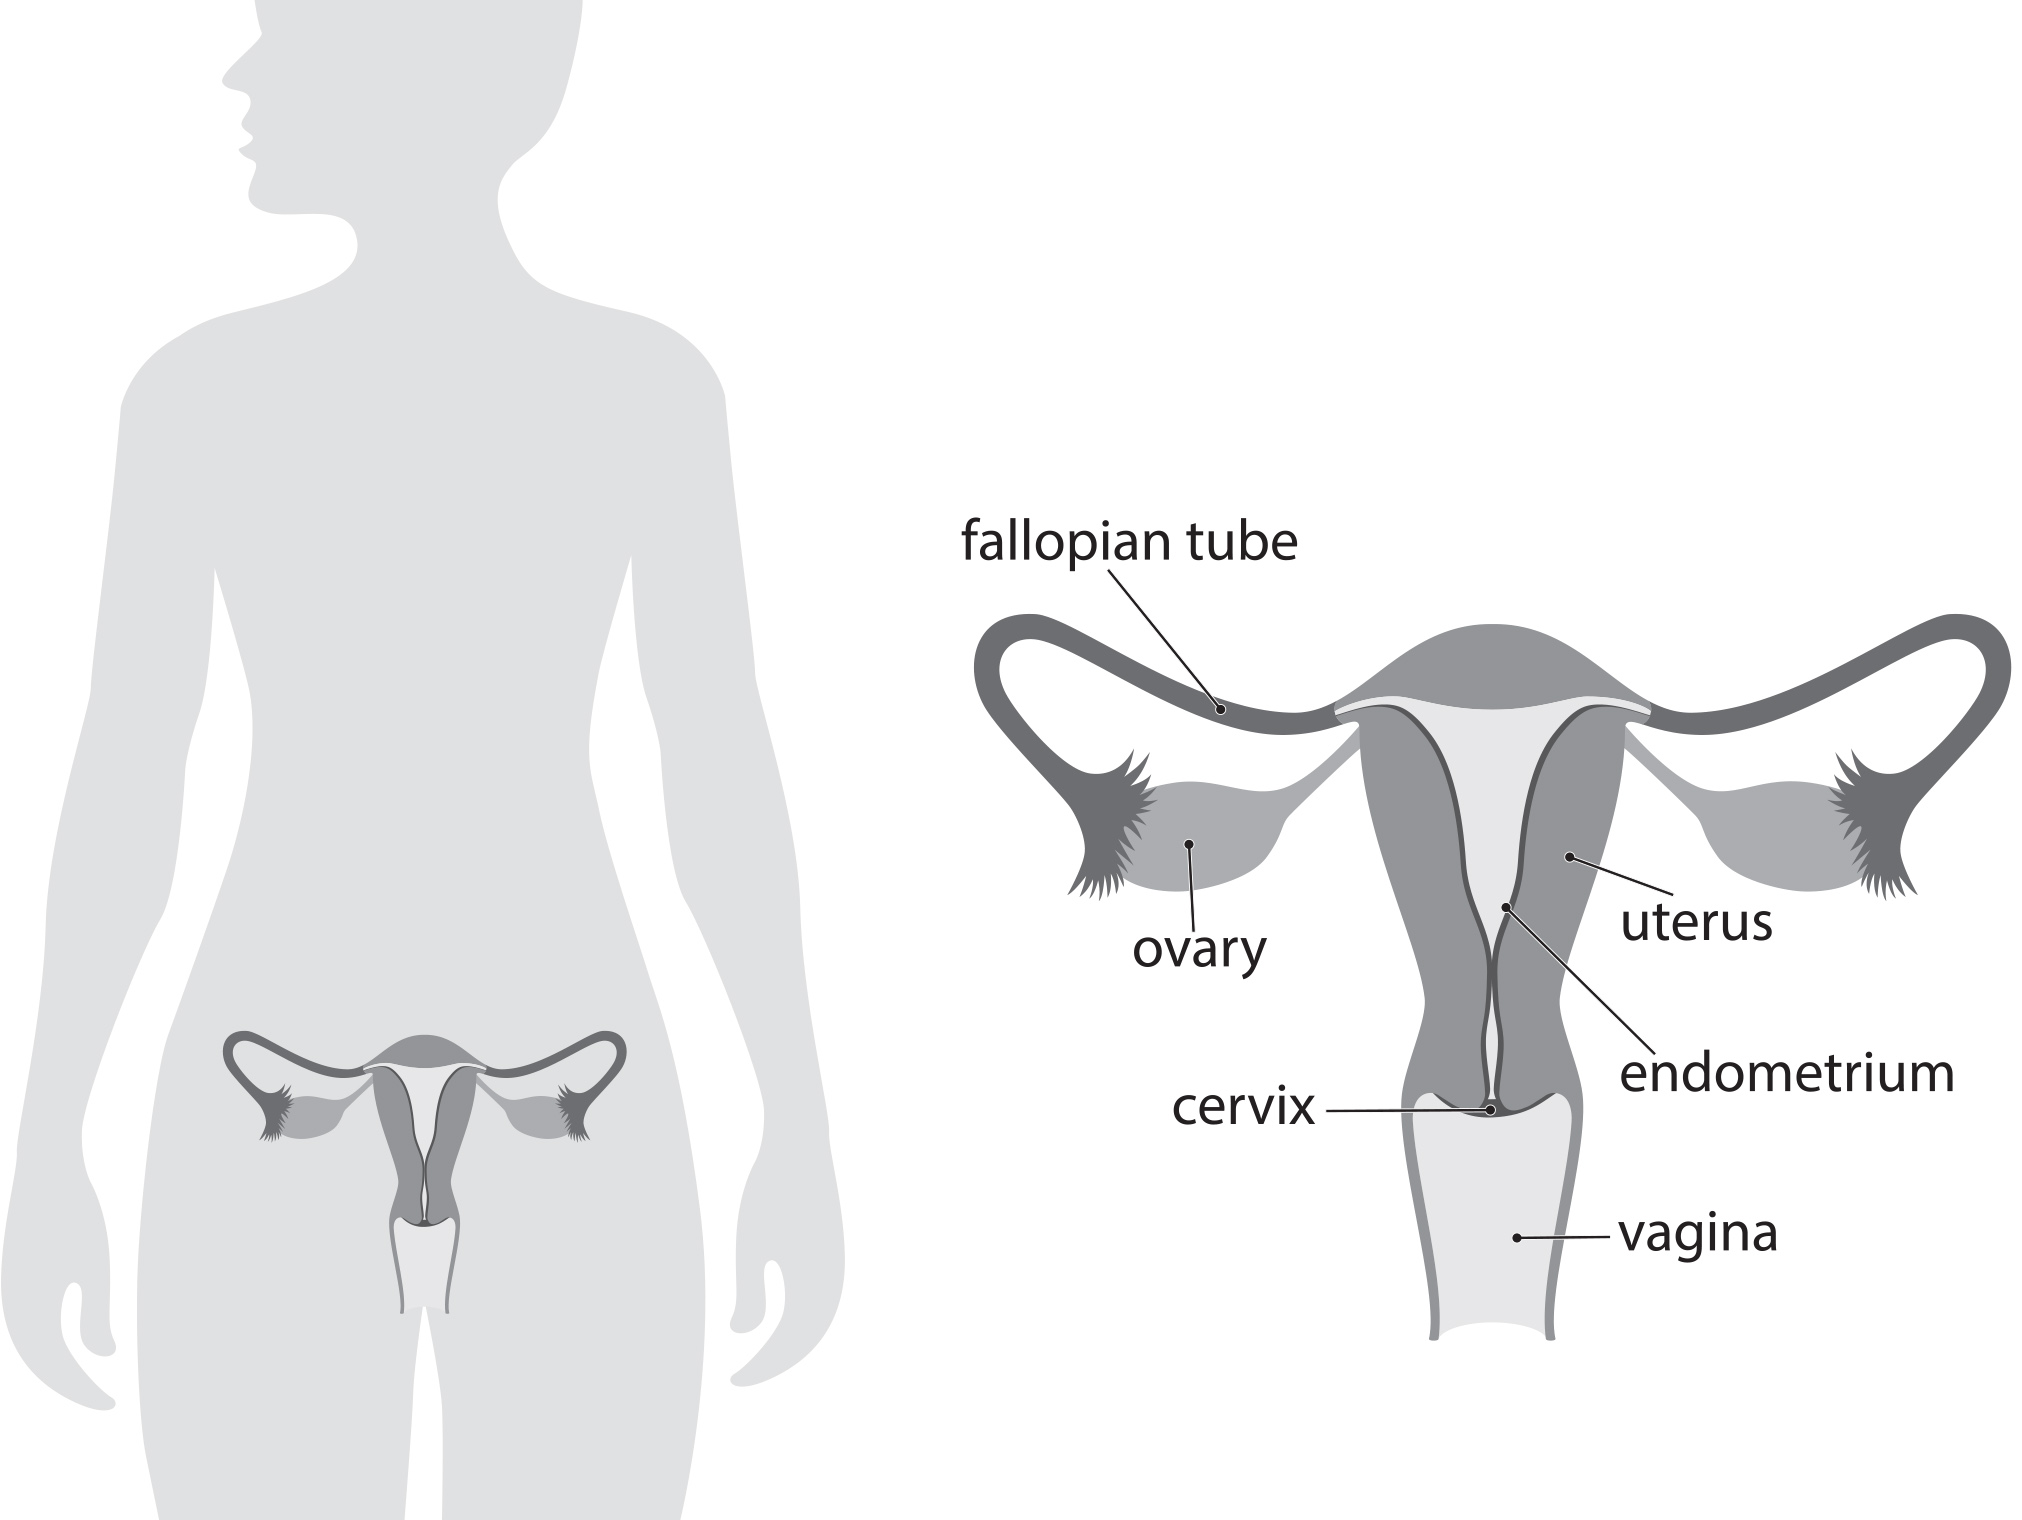 image of the female reproductive tract